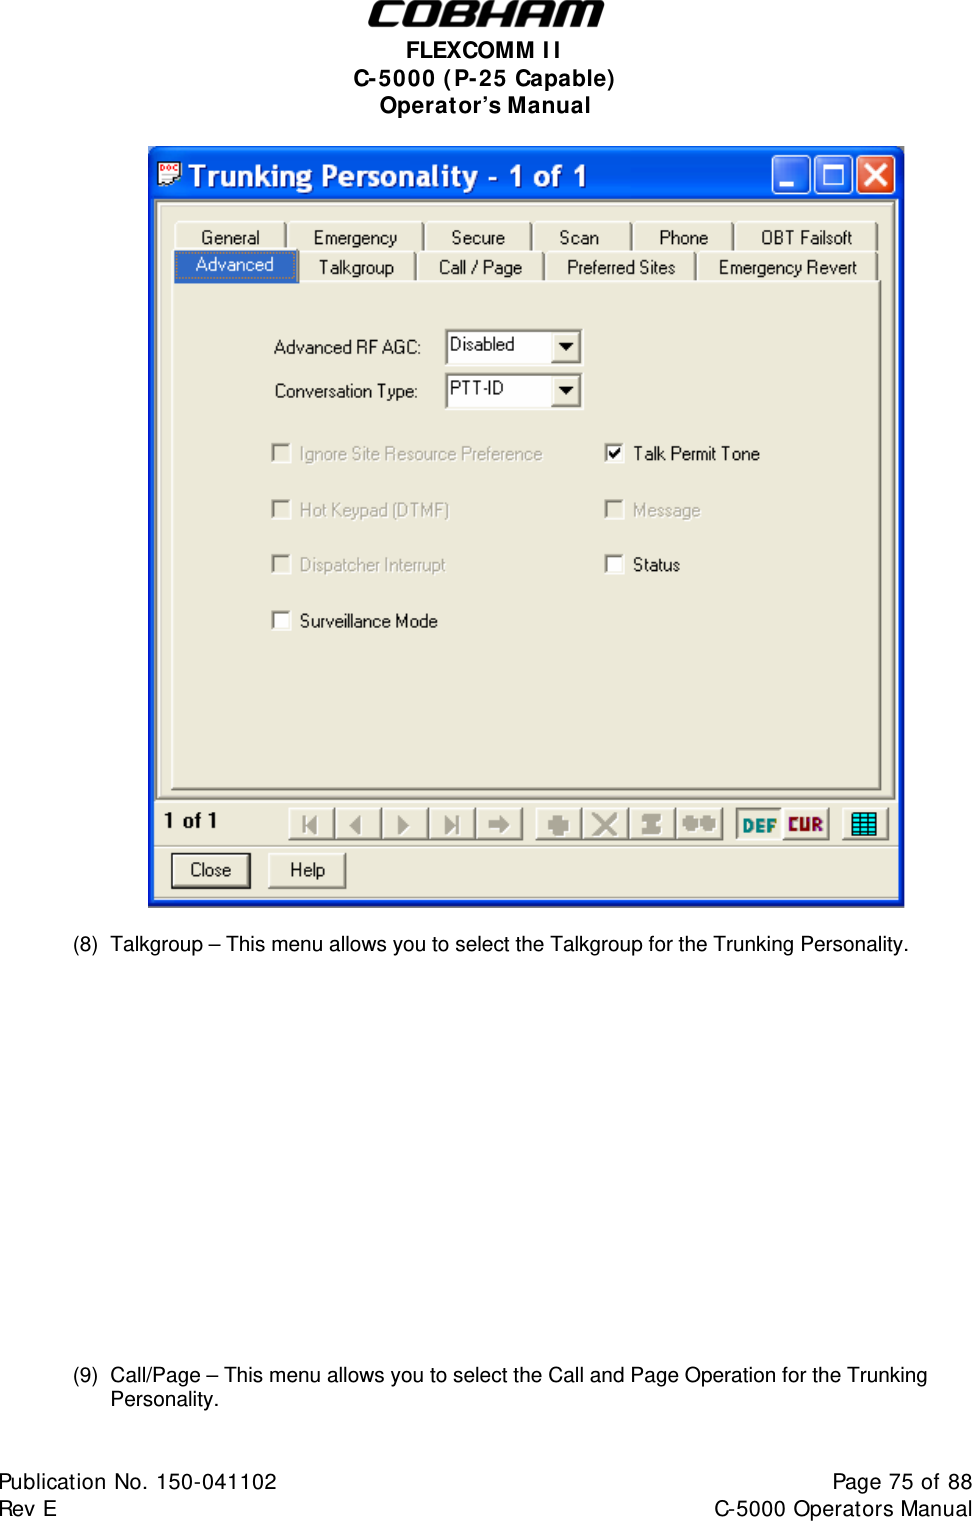  FLEXCOMM I I  C-5000 ( P-25 Capable)  Operator’s Manual       (8)  Talkgroup – This menu allows you to select the Talkgroup for the Trunking Personality.                  (9)  Call/Page – This menu allows you to select the Call and Page Operation for the Trunking Personality.  Publication No. 150-041102  Page 75 of 88  Rev E  C-5000 Operators Manual    